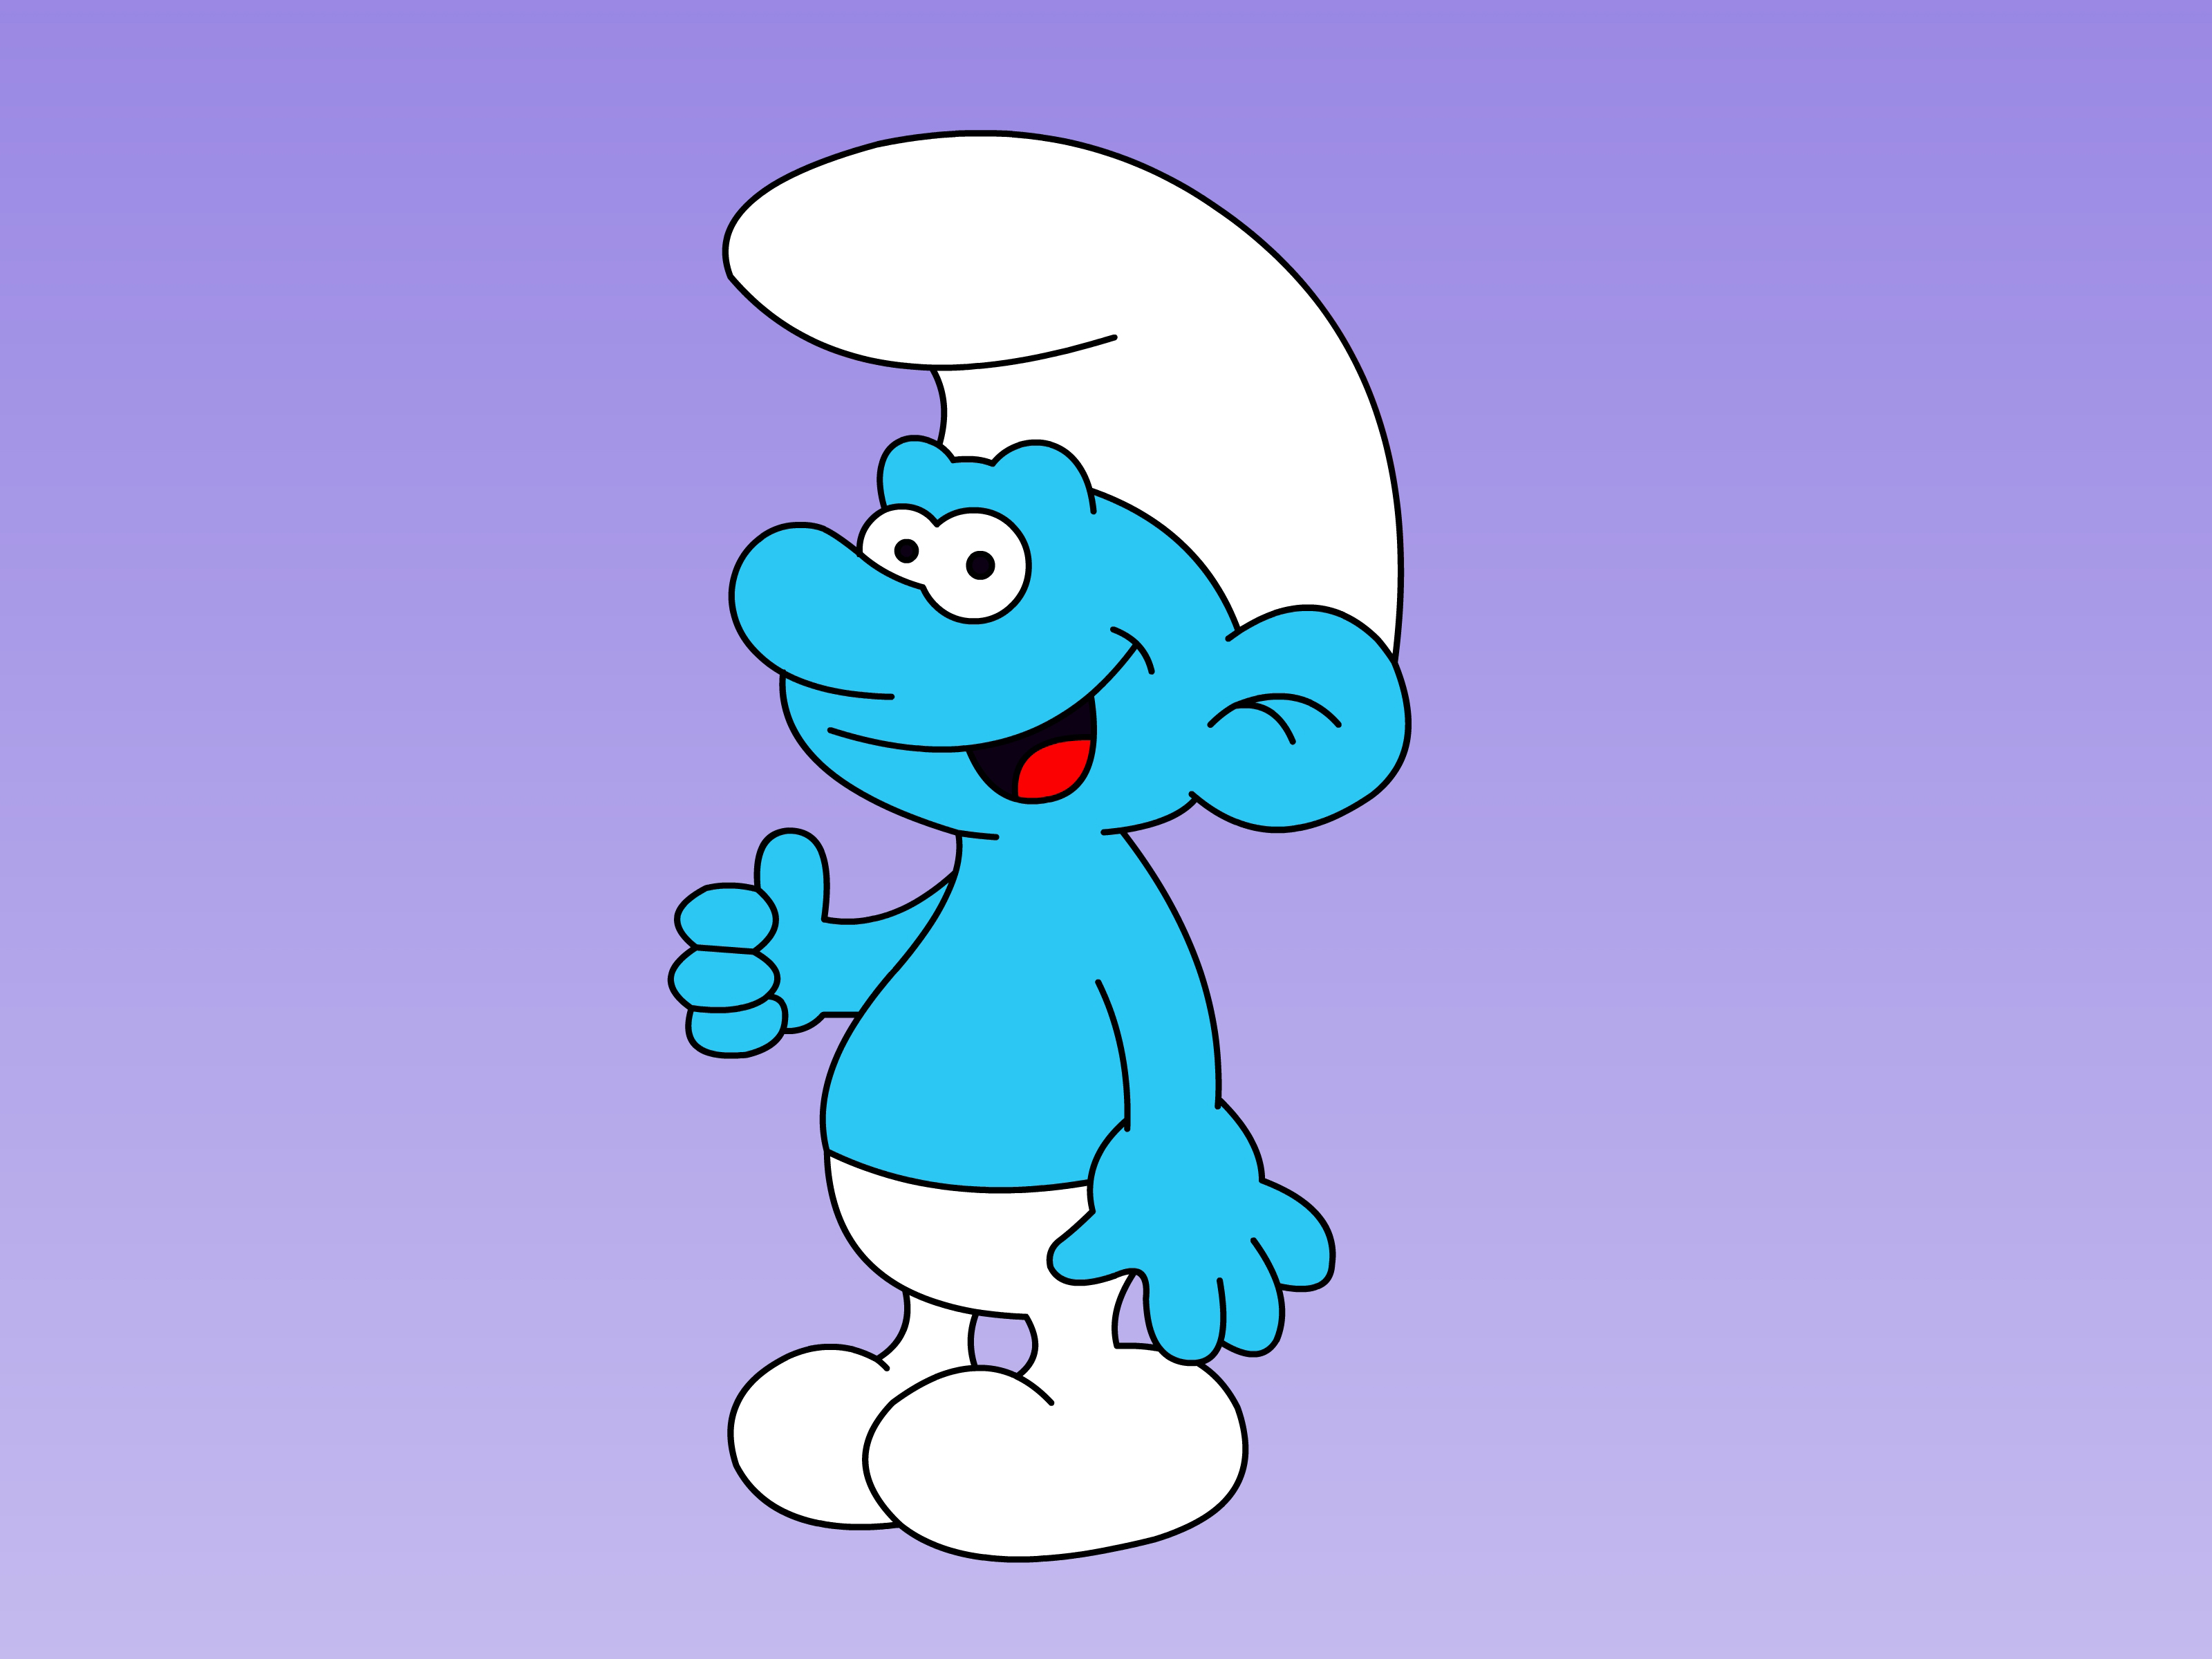 3200x2400 How To Draw A Smurf 10 Steps (With Pictures) - Smurf Sketch.